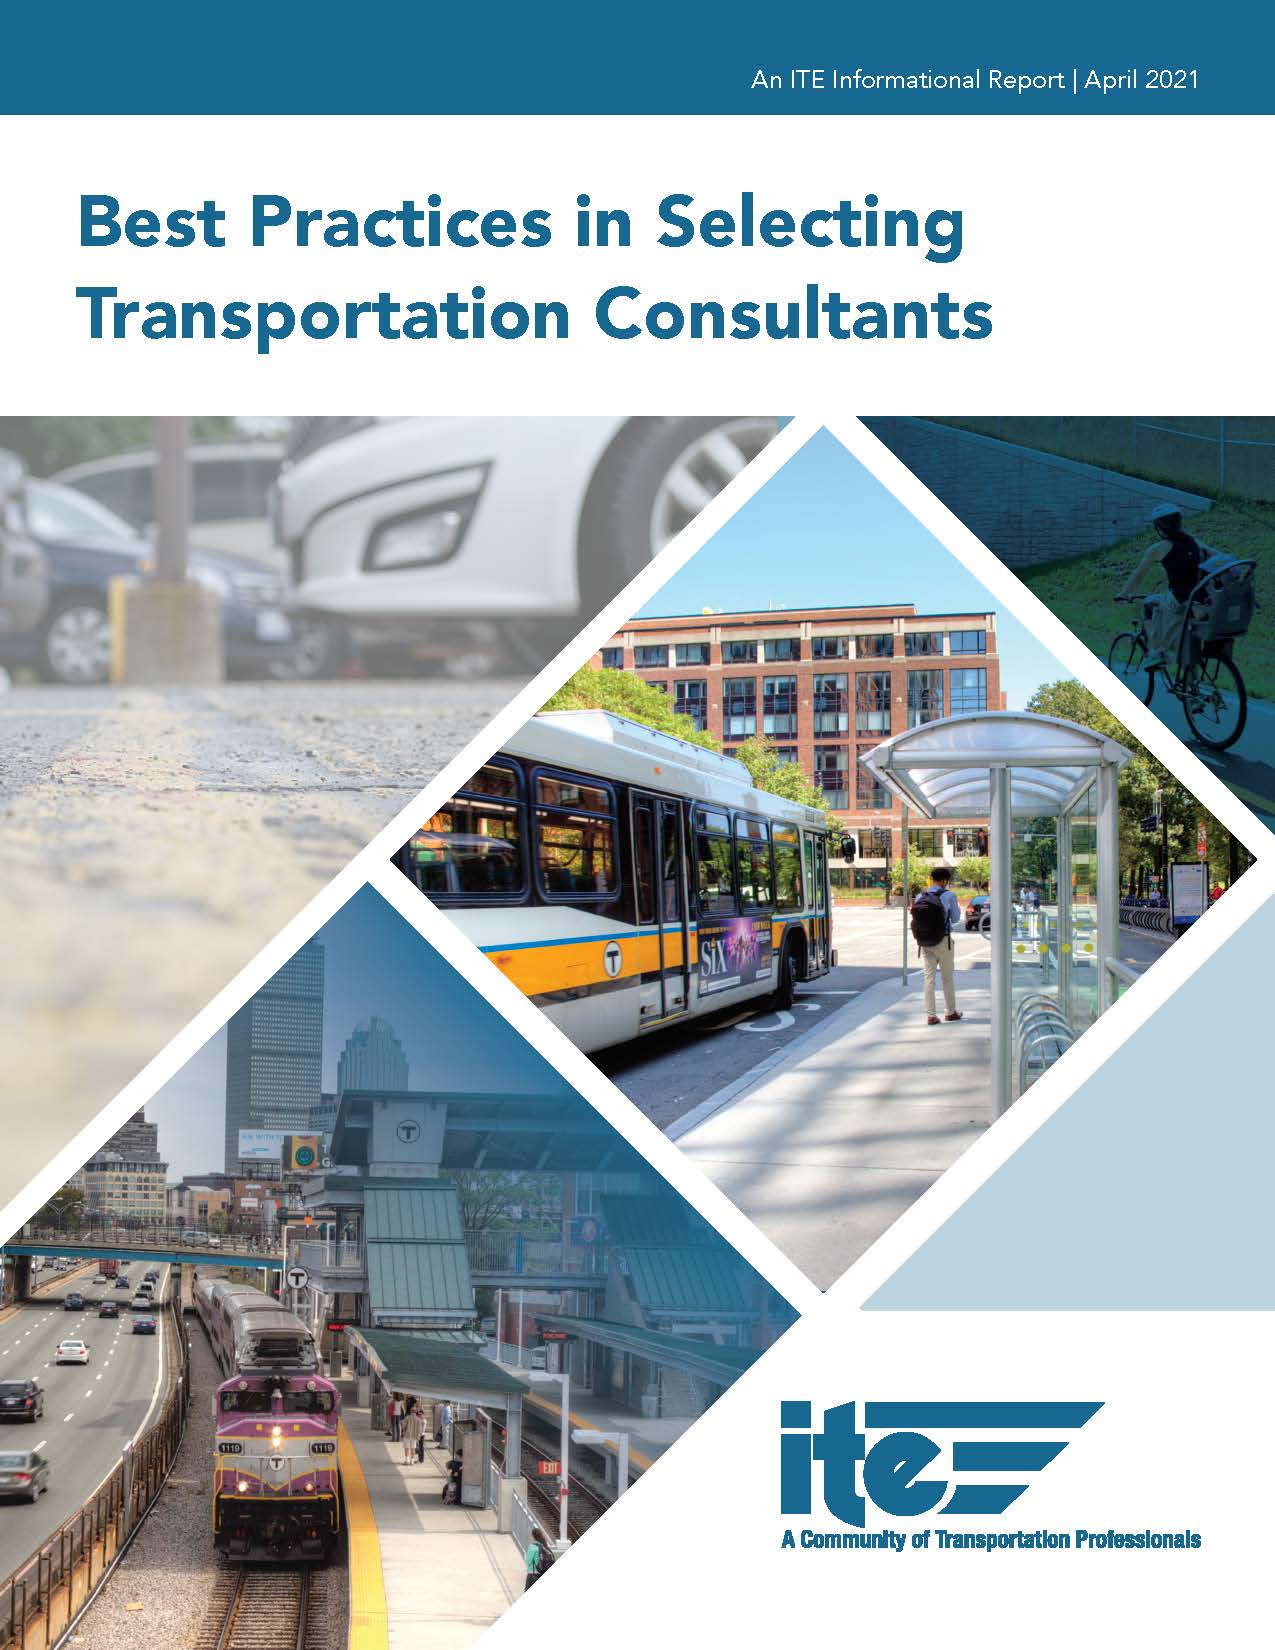 Best Practices in Selecting Transportation Consultants (PDF)